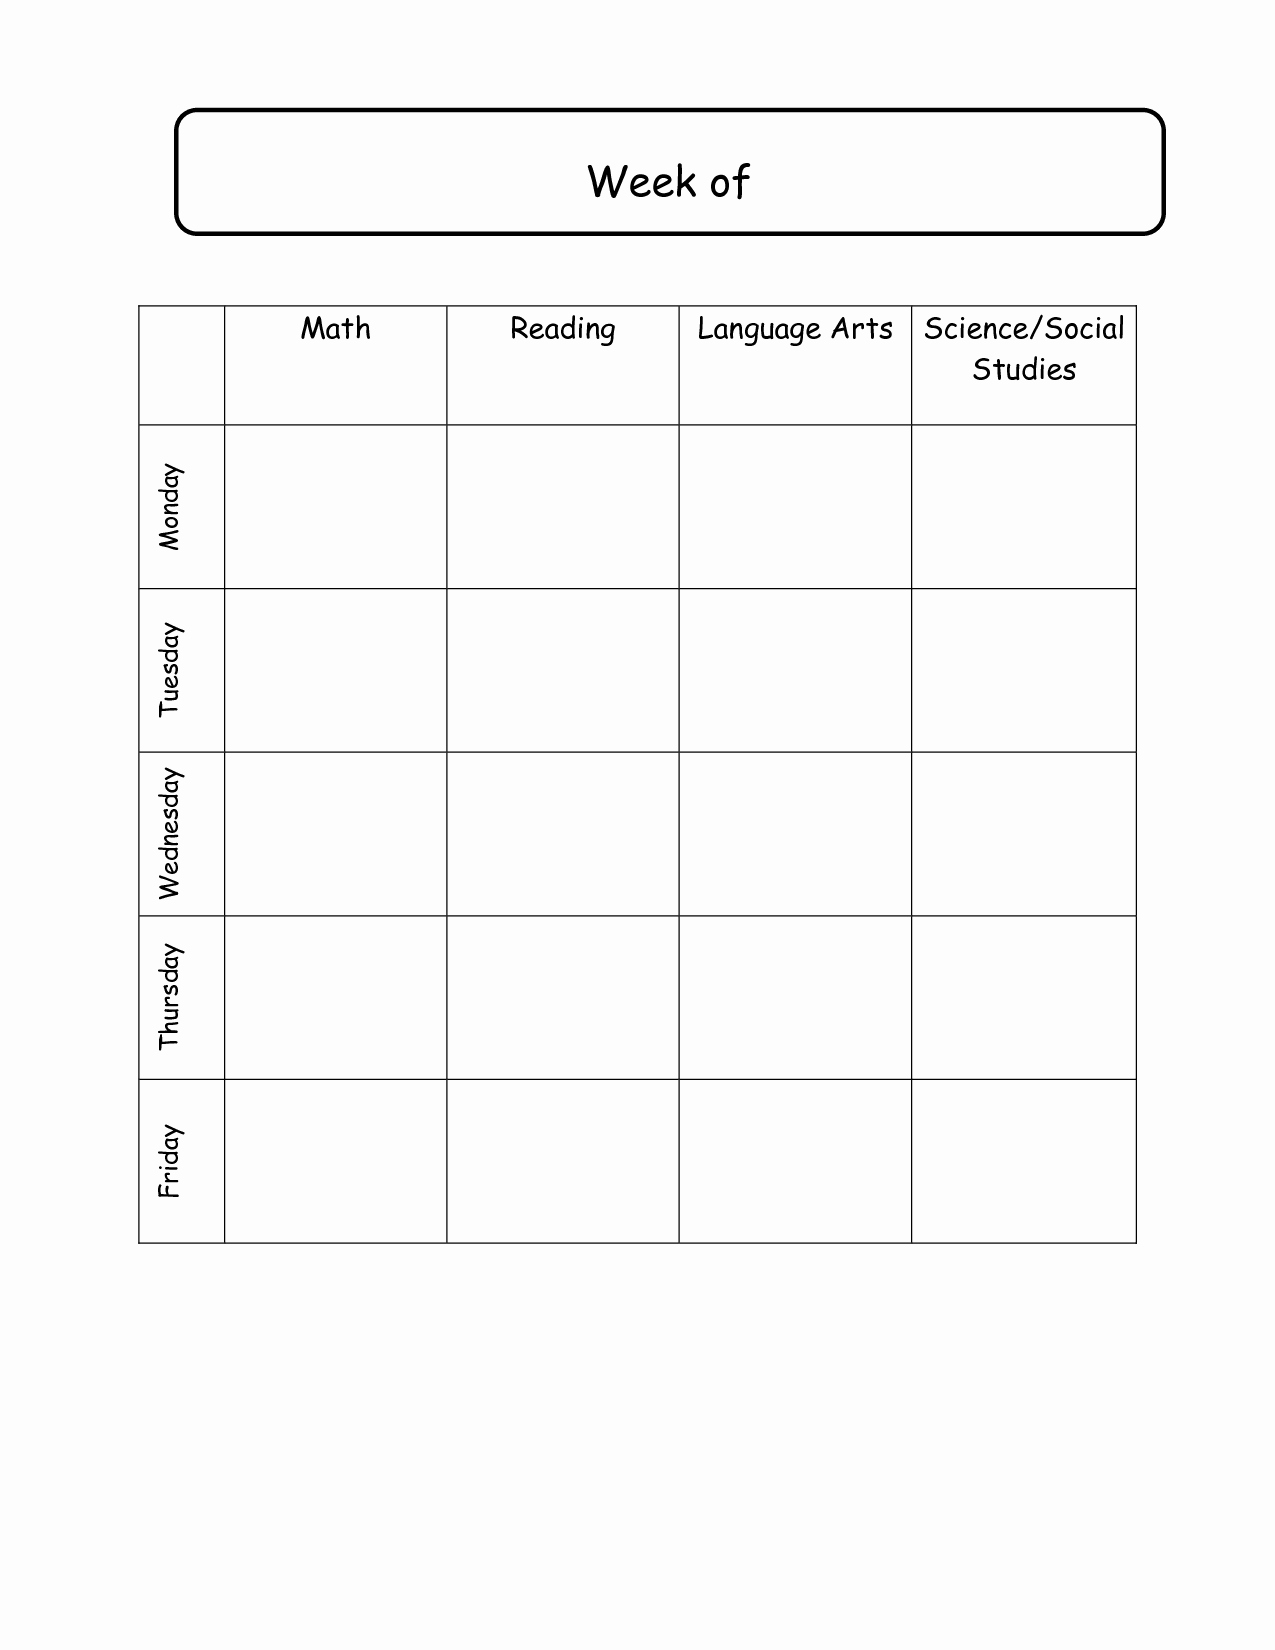 Lesson Plans Template Elementary Best Of Elementary School Daily Schedule Template